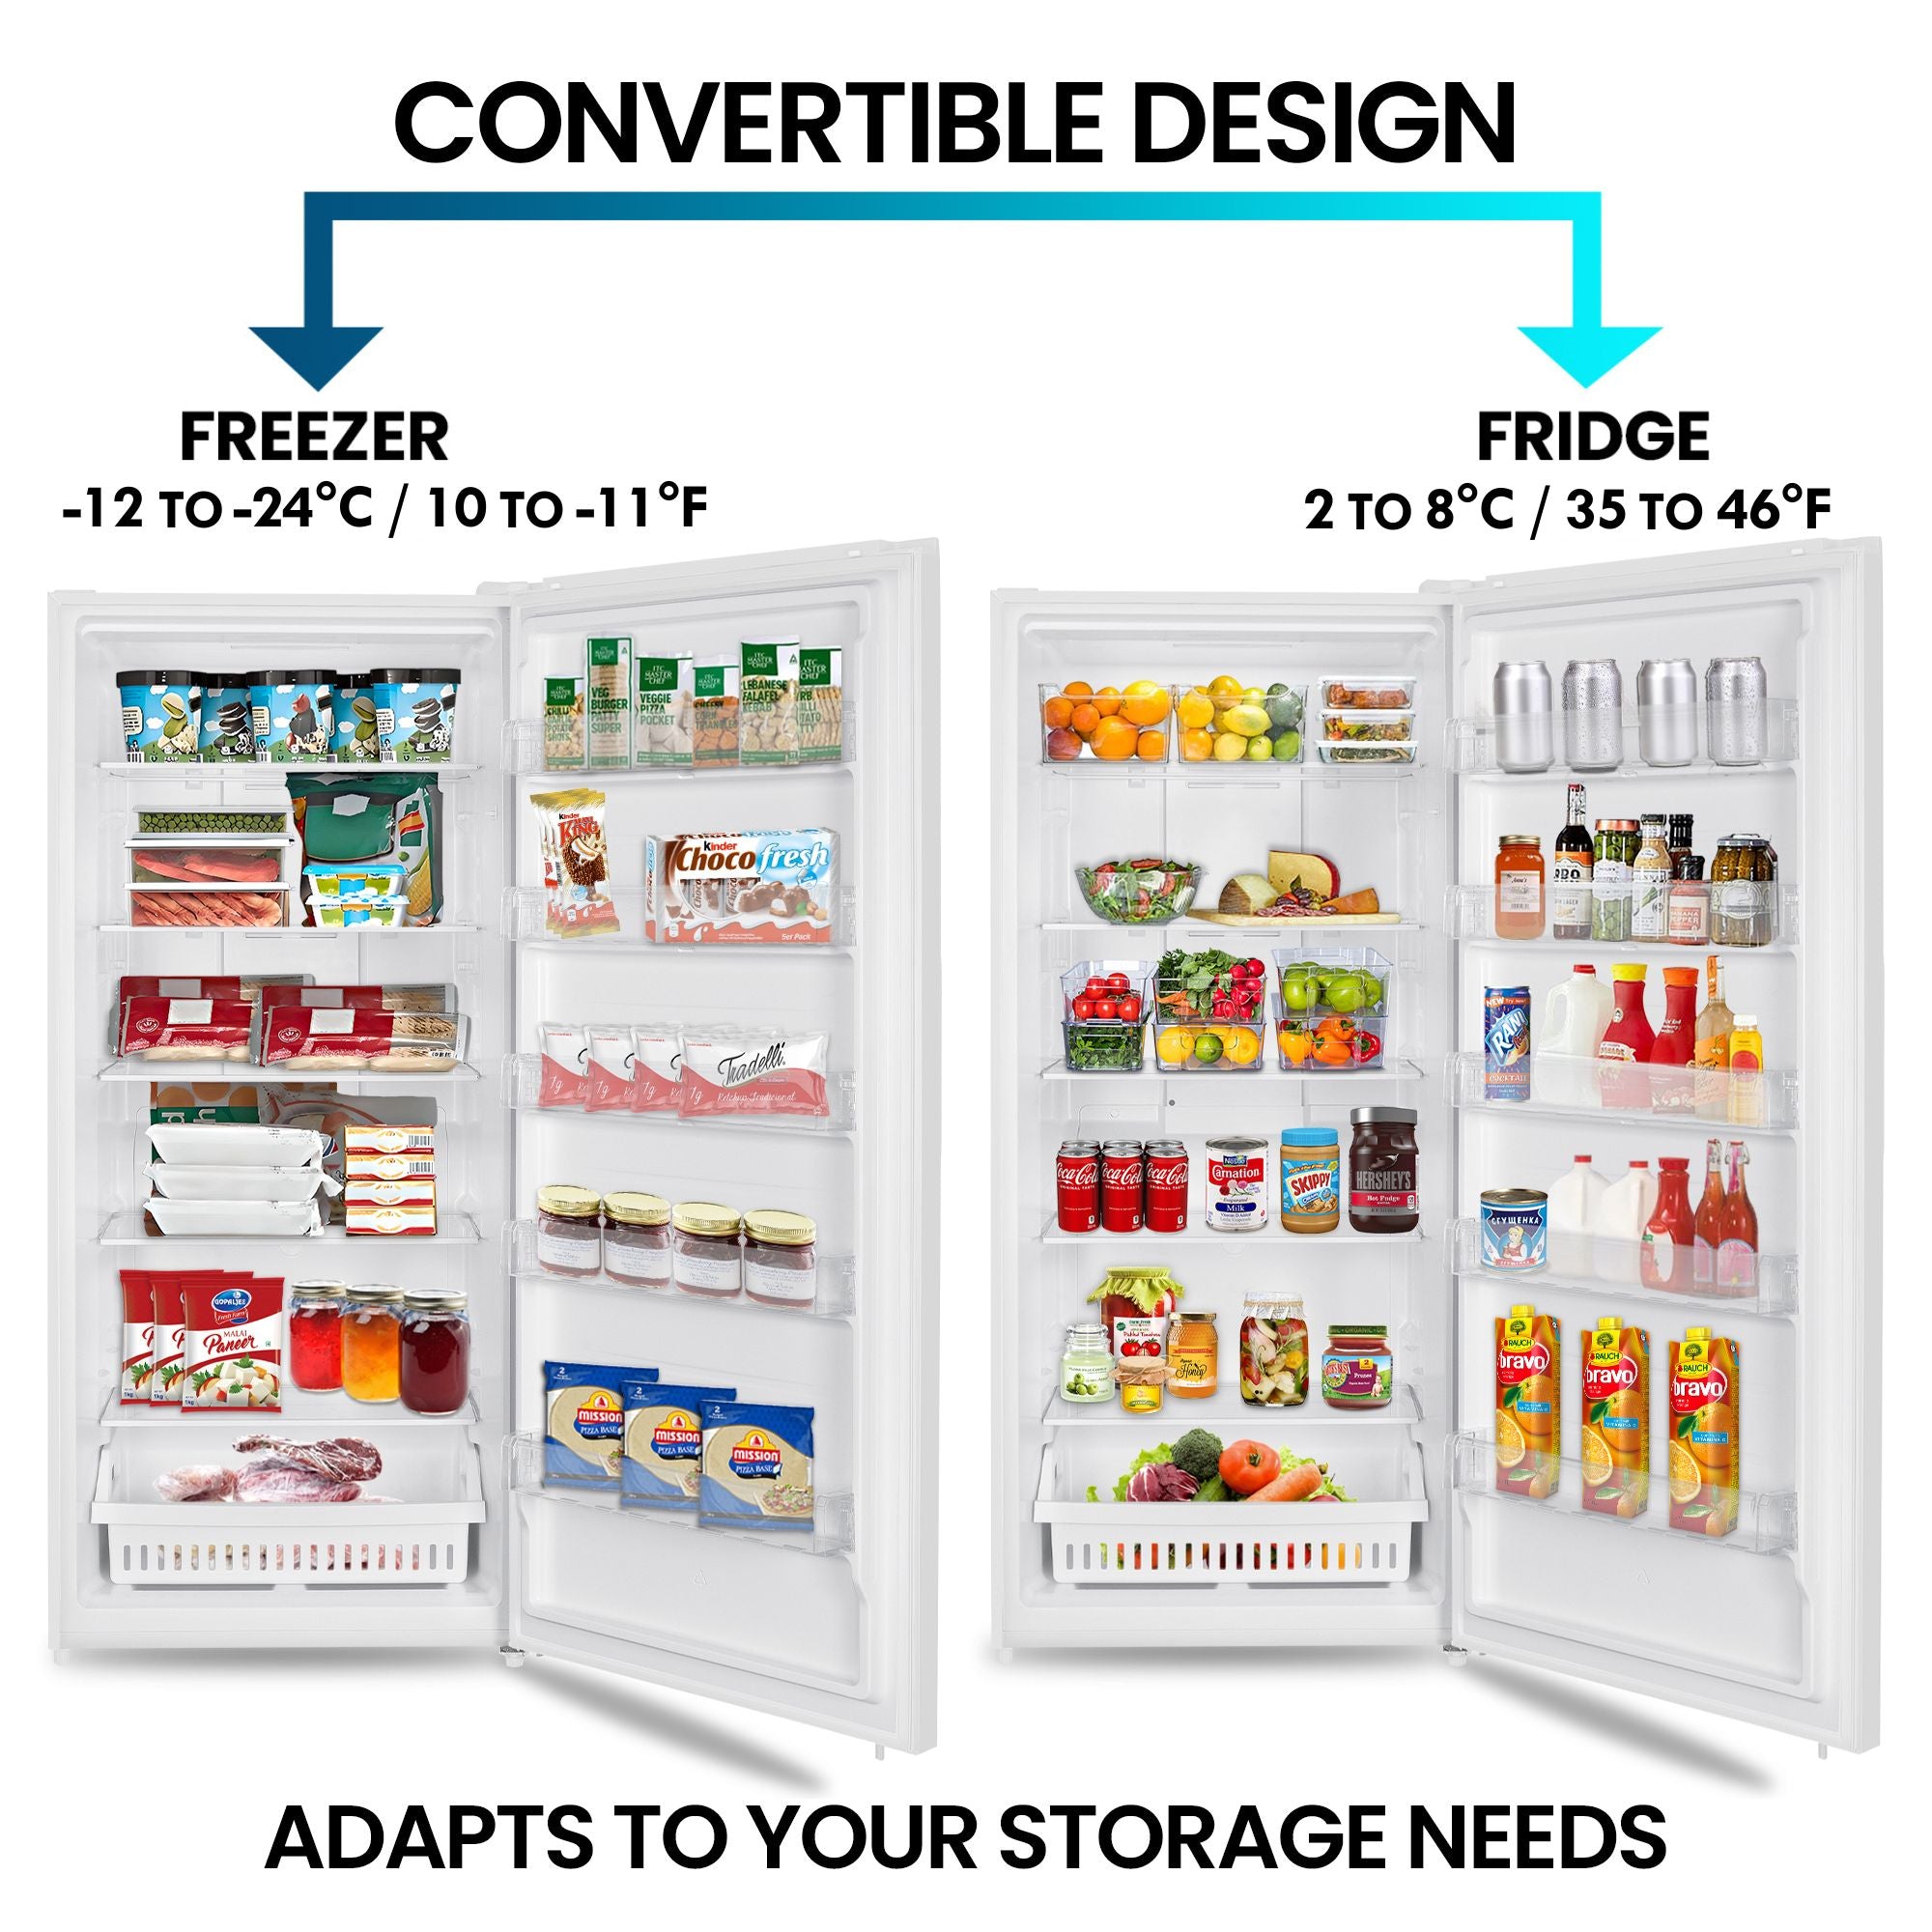 Two pictures show the Kenmore upright convertible open and filled with food items being used as a freezer and a refrigerator. Text above reads, "Convertible design: Freezer -12 to -24°C / 10 to -11°F; Fridge 2 to 8°C/ 35 to 46°F," and text below reads, "Adapts to your storage needs."